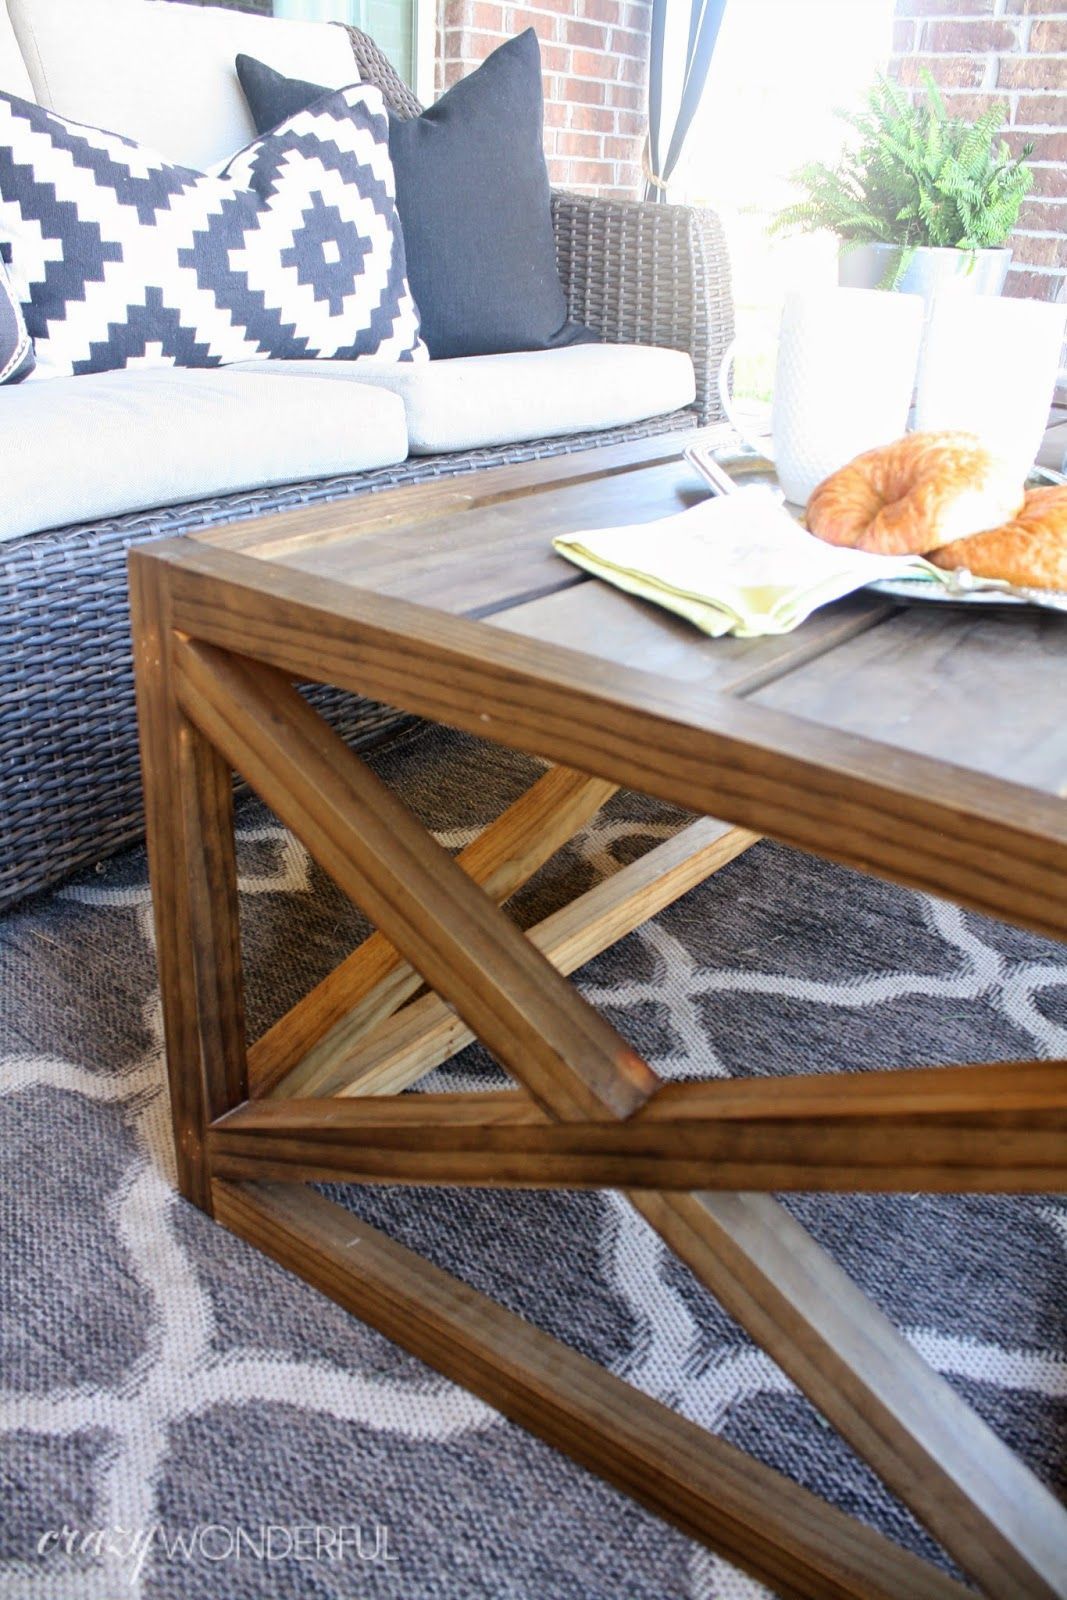 Diy Outdoor Coffee Table | With Storage – Crazy Wonderful | Outdoor With Regard To Outdoor Coffee Tables With Storage (View 18 of 20)